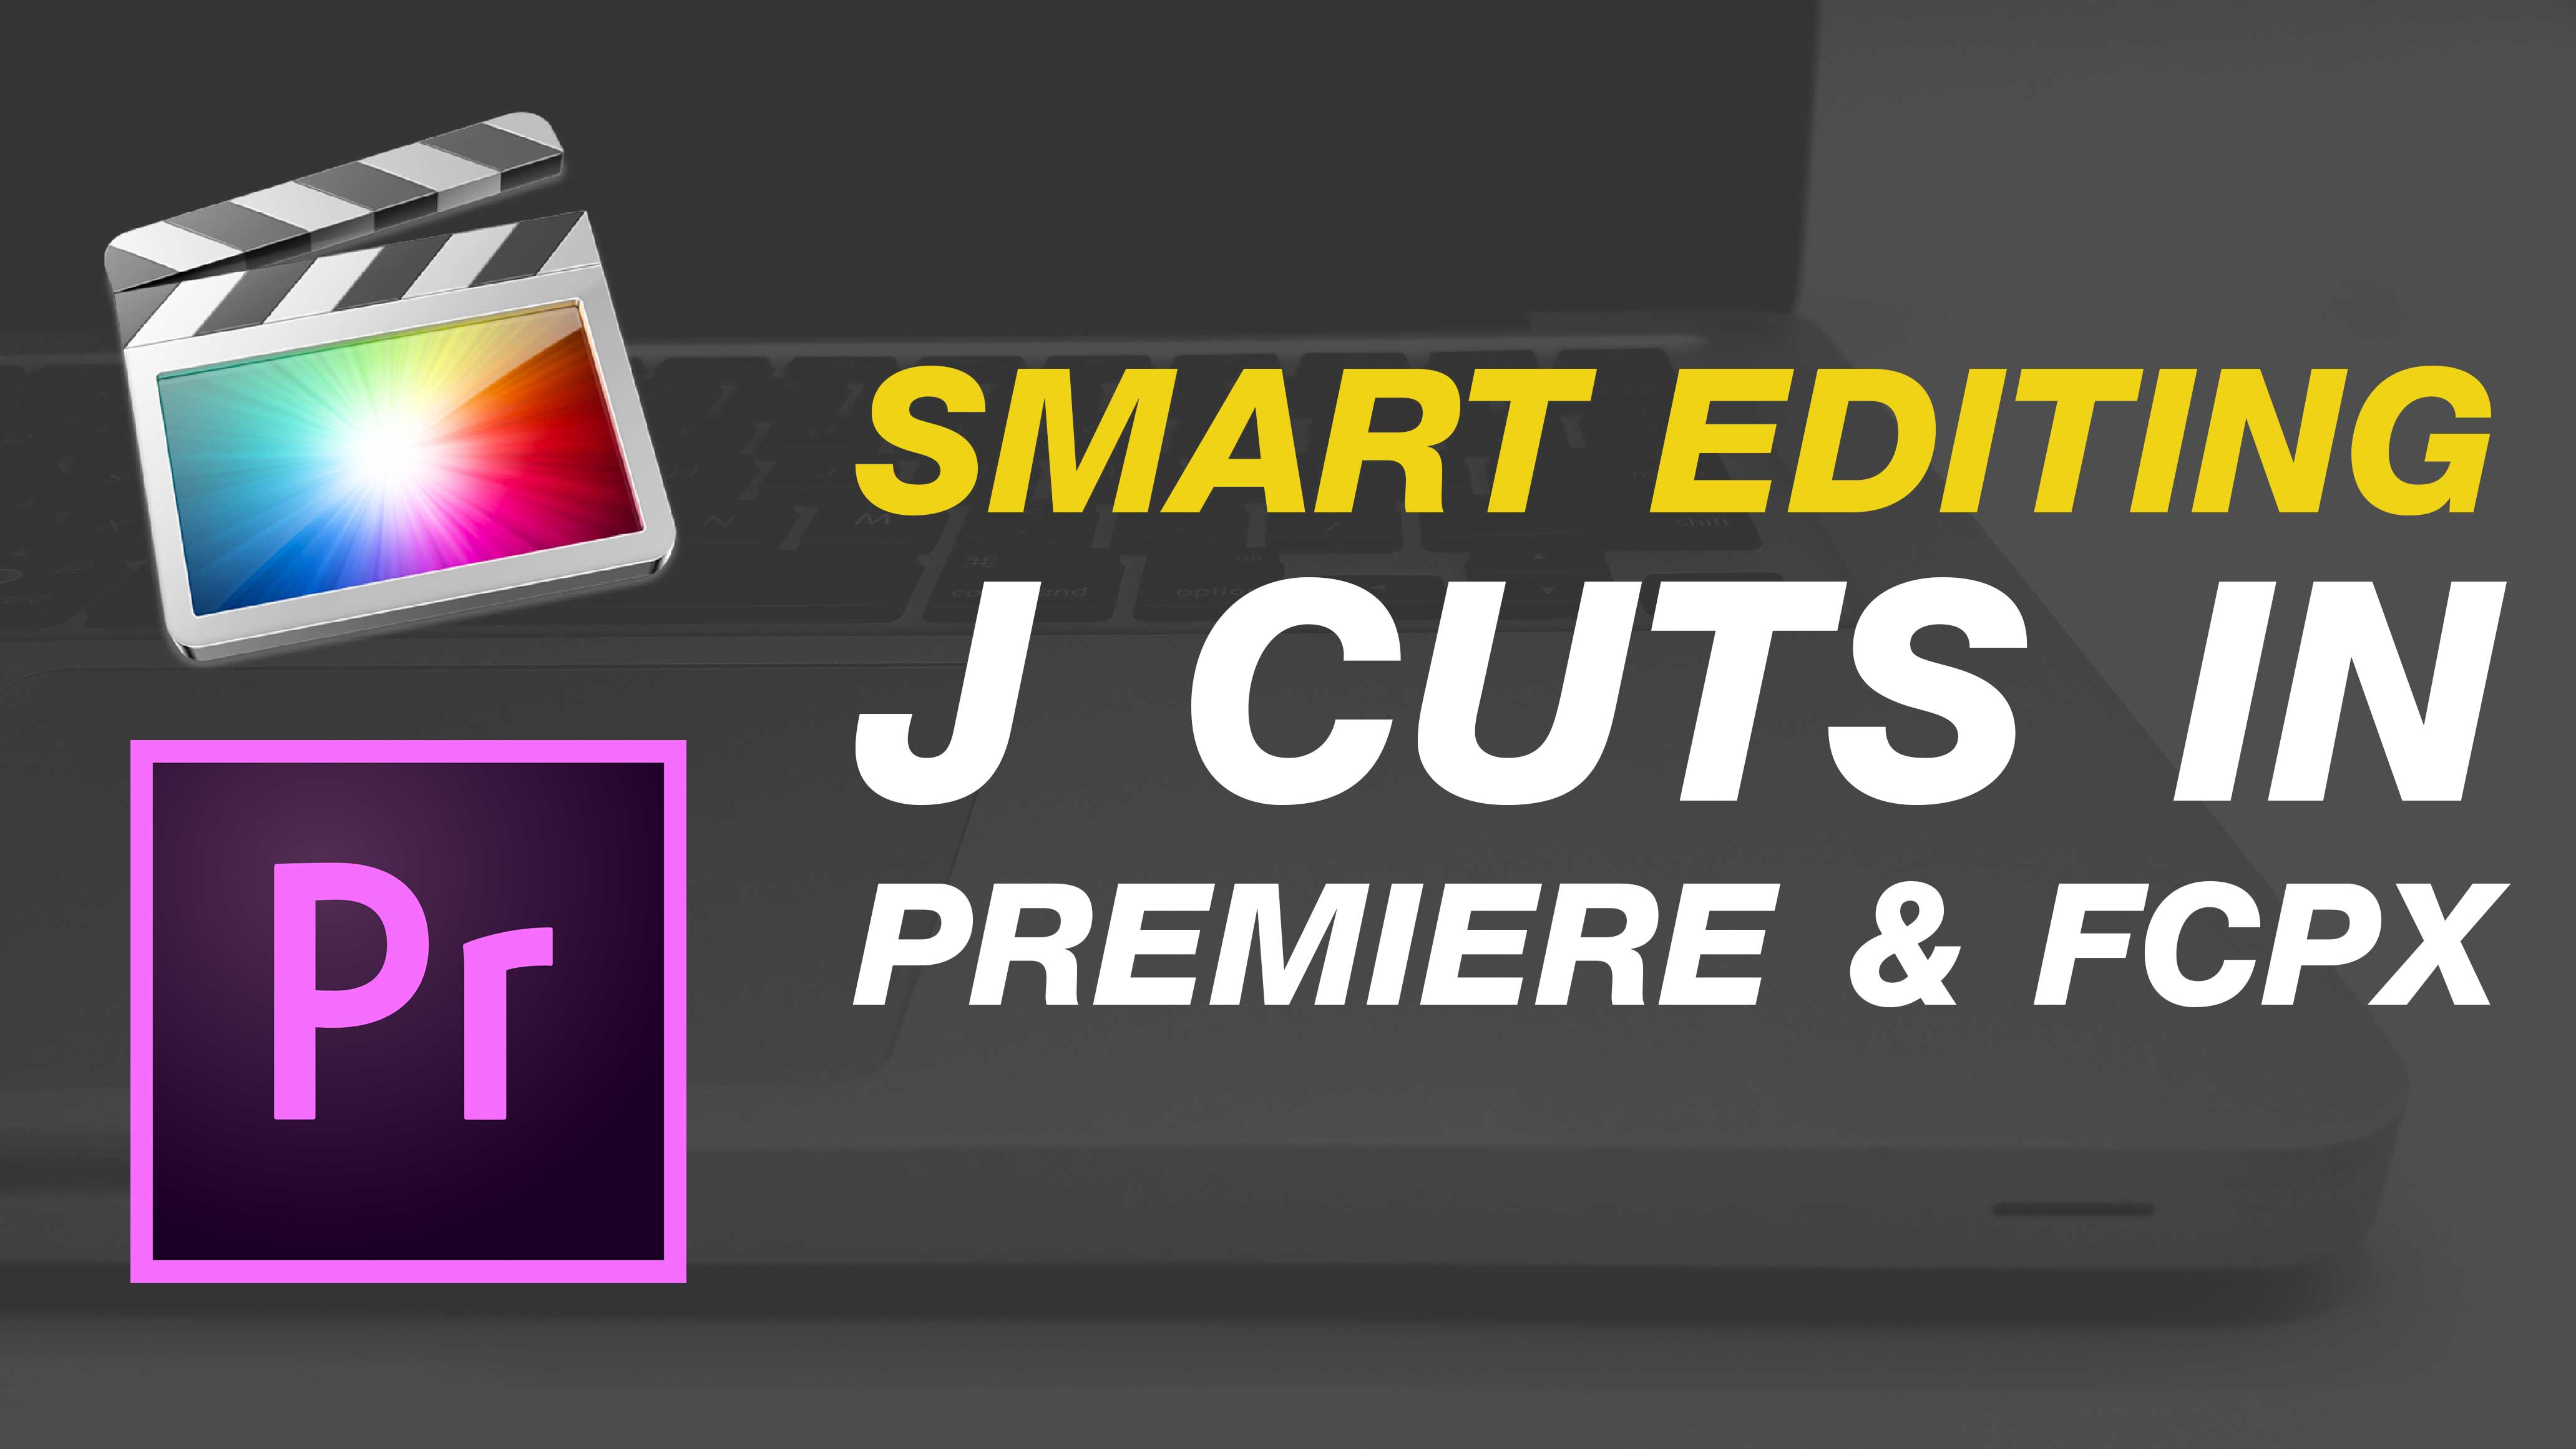 Tips for Editing with J-Cuts in Adobe Premiere Pro CC & Final Cut Pro X #fcpx #premierepro #yqr #yeg #yvr